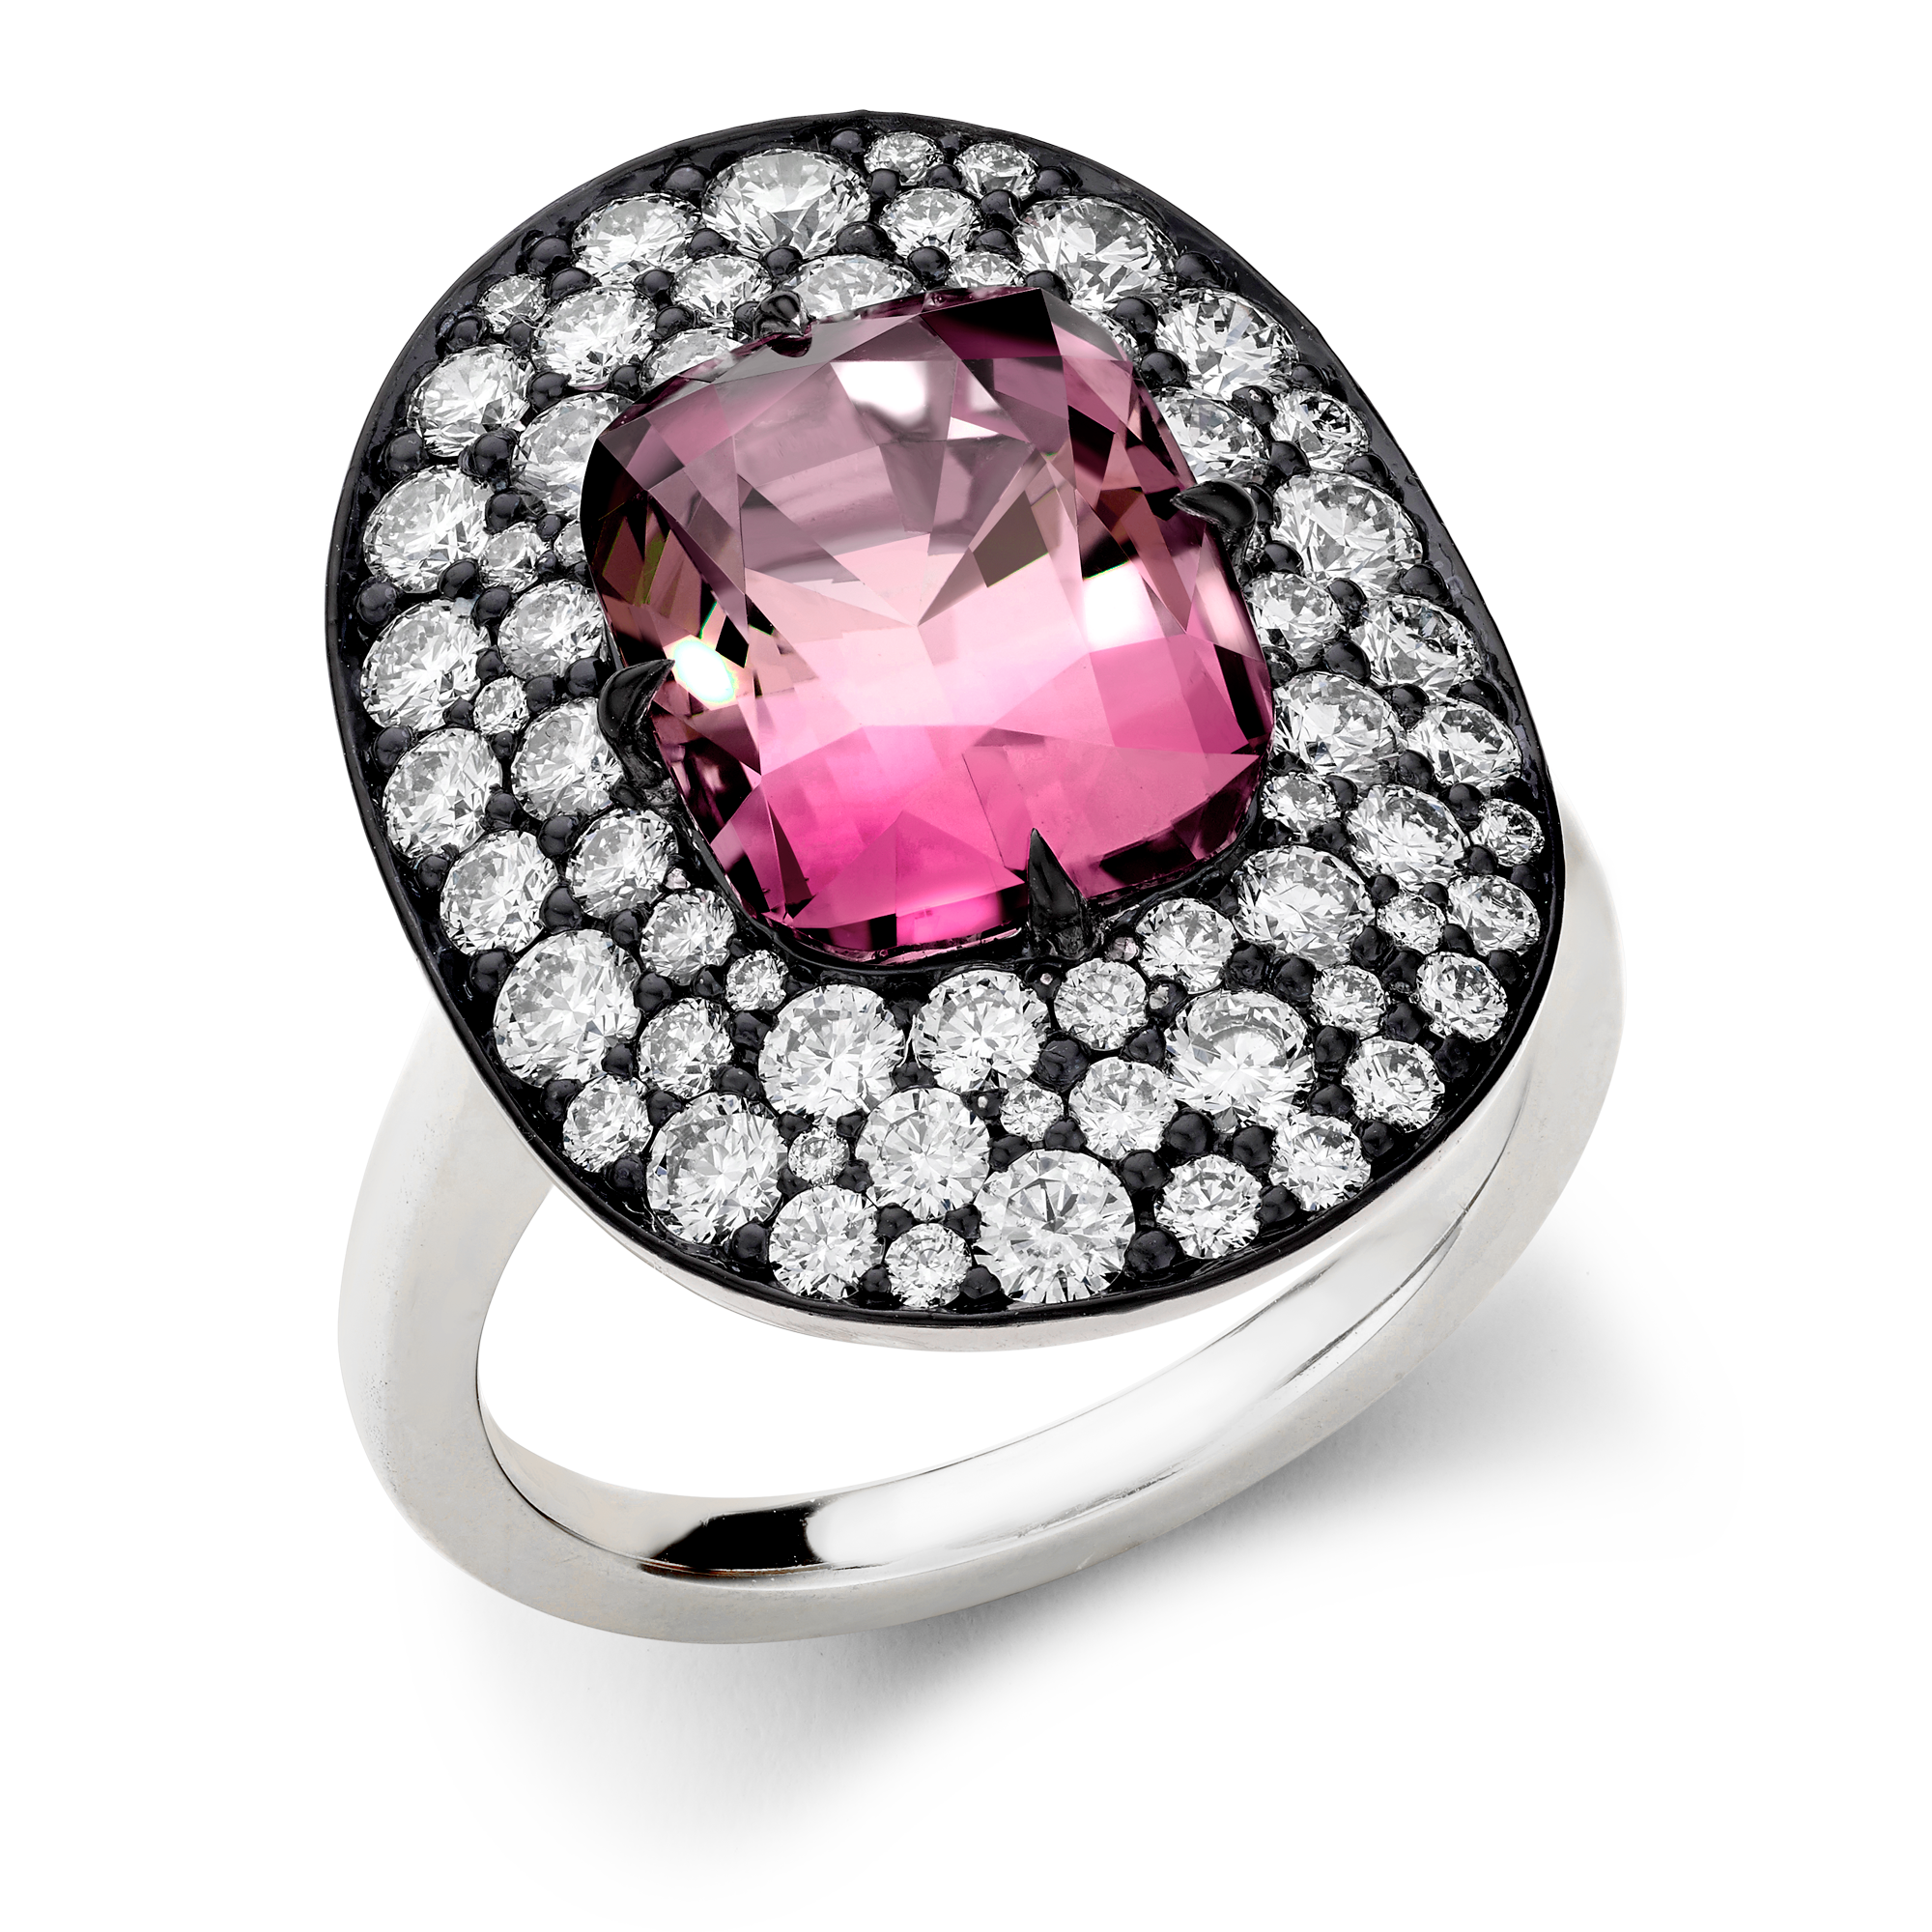 Snowstorm 4.72ct Pink Tourmaline and Diamond Cocktail Ring Cushion modern cut, Claw set_1